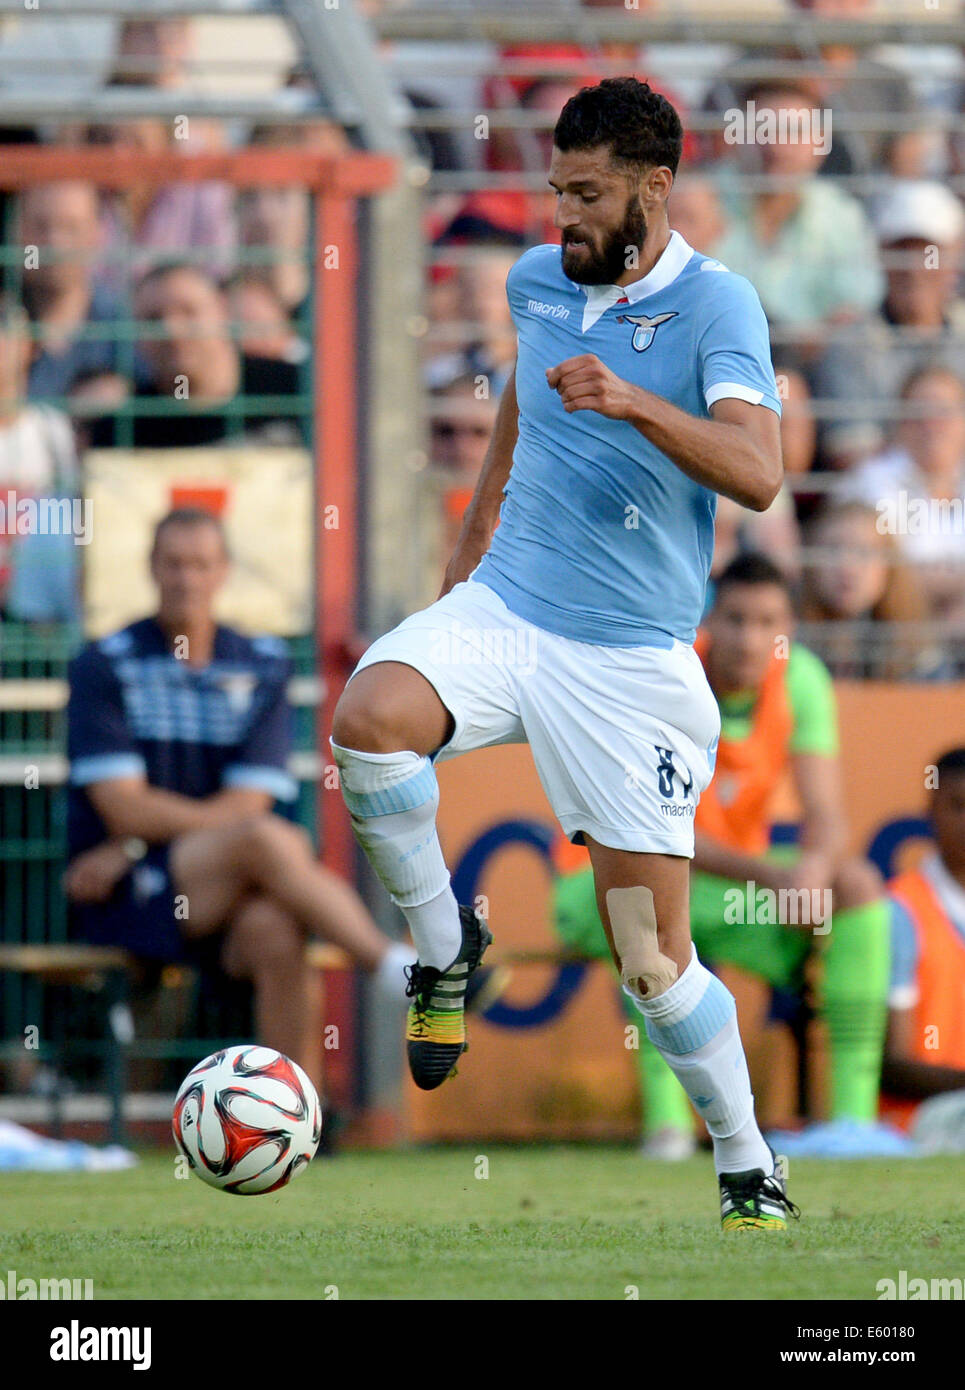 Luebeck, Germany. 08th Aug, 2014. Rome's Antonio Candreva in action during the soccer test match between Hamburger SV and S.S. Lazio Rome at Stadium at the Lohmuehle in Luebeck, Germany, 08 August 2014. Photo: Daniel Reinhardt/dpa/Alamy Live News Stock Photo